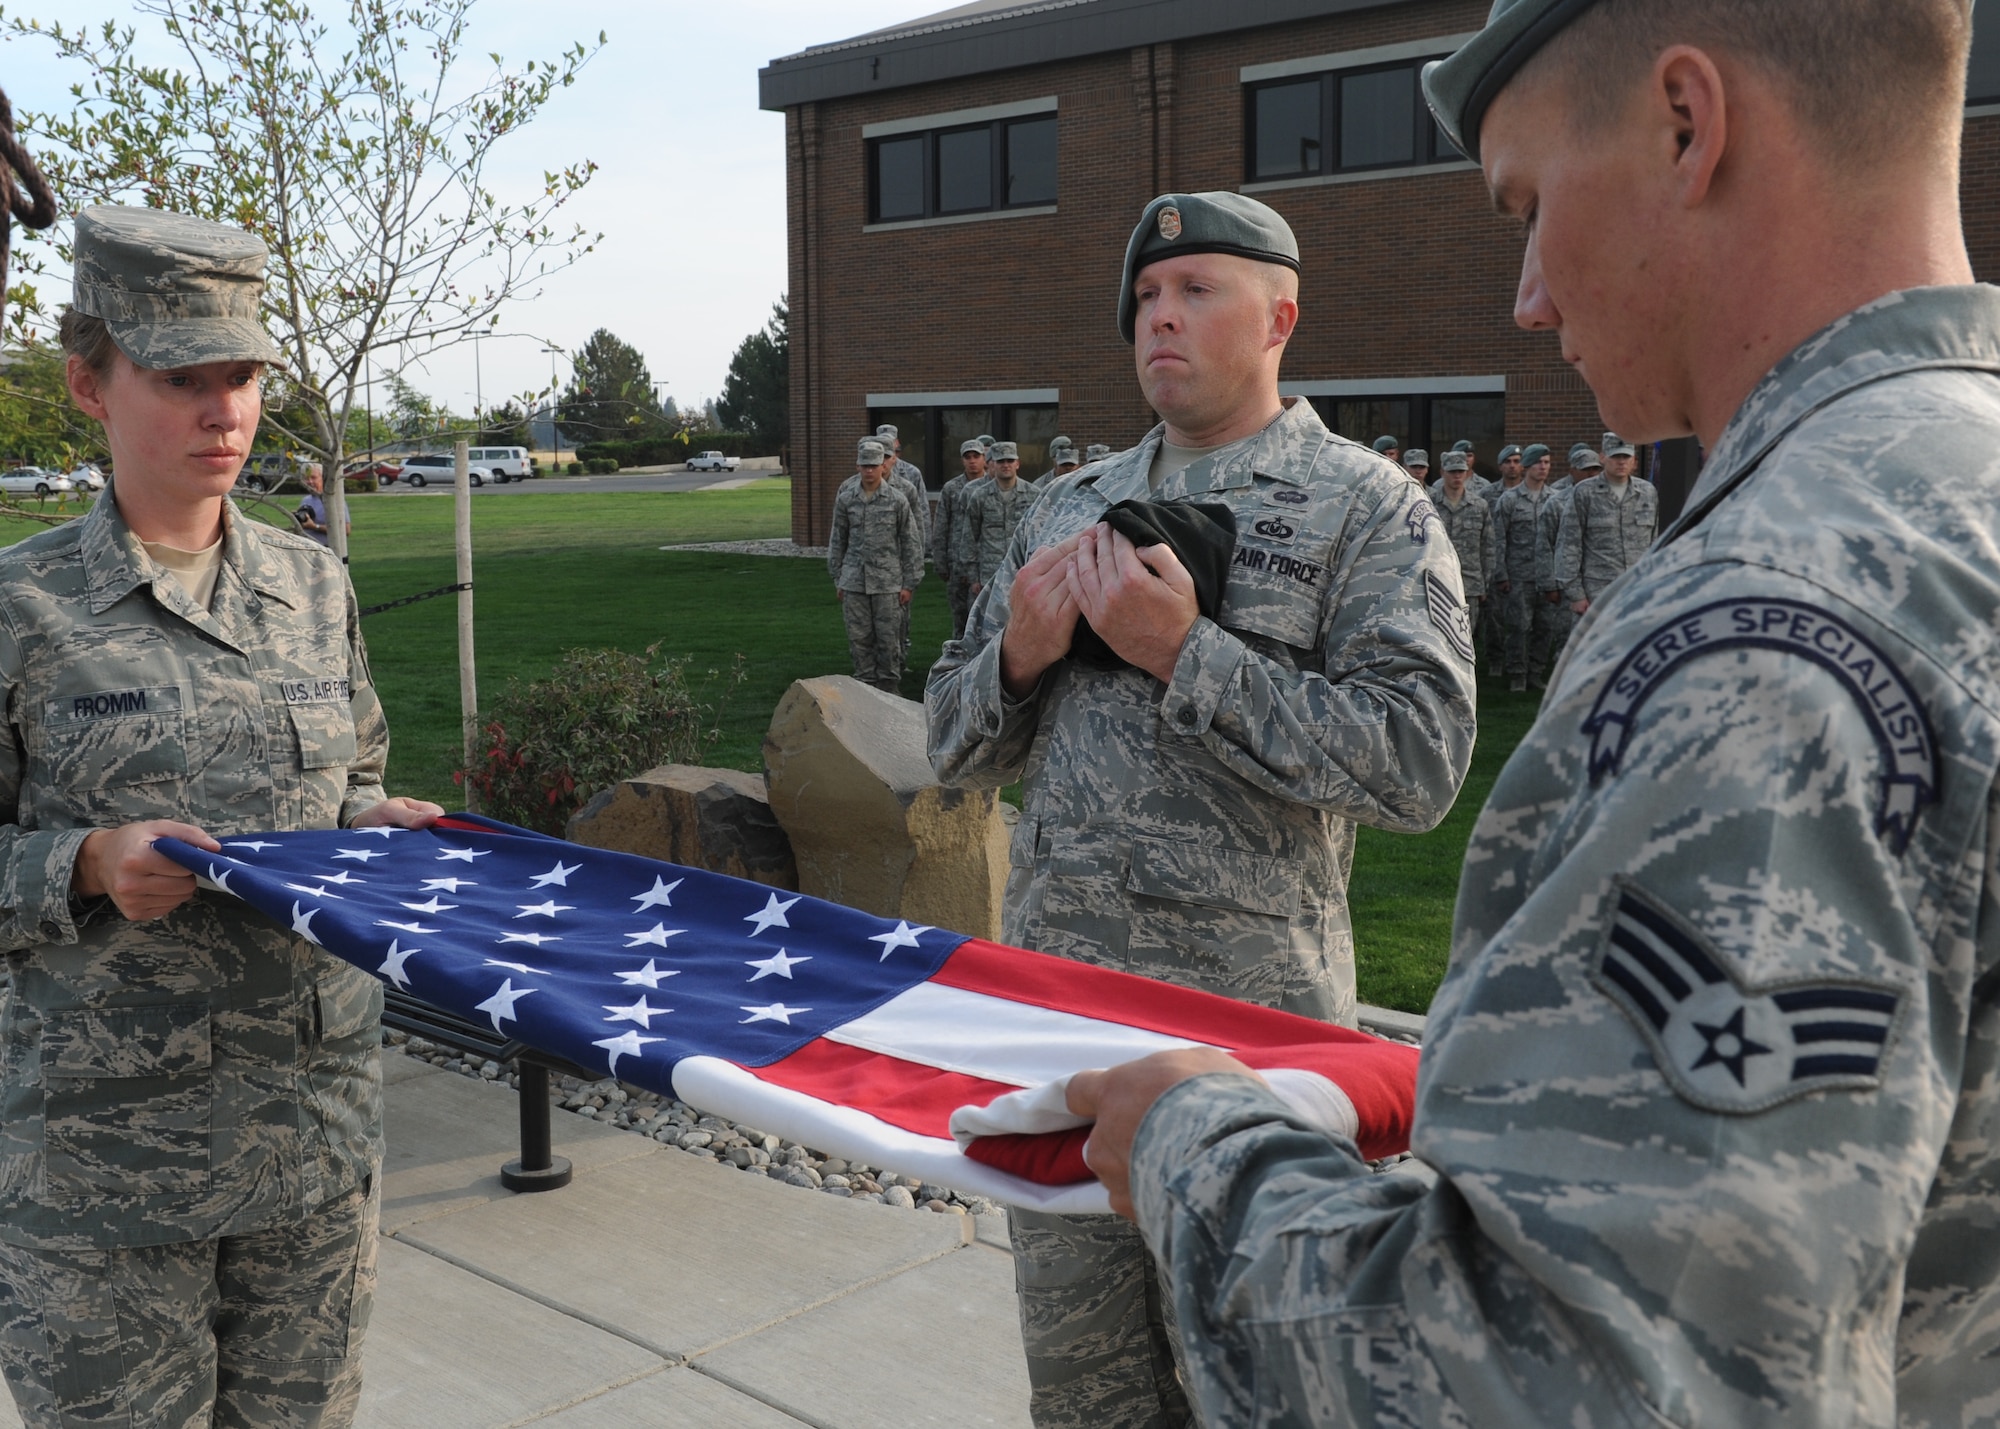 Staff Sgt. Elcke Fromm, 336th Training Group commander's support staff, Tech Sgt. Brandon Biddle, 22nd Training Squadron Survival Evasion Resistance Escape specialist, and Senior Airman Anthony Pinque, 22nd TRS SERE specialist, perform a flag folding during a Retreat Ceremony honoring prisoners of war and those missing in action at Fairchild Air Force Base, Wash. Sept. 21, 2012. The National POW/MIA Recognition Day is a day of observance for all Ameicans to pause in remembrance of the sacrifices and service of those who are missing in action. (U.S. Air Force photo by Staff Sgt. Michael Means)